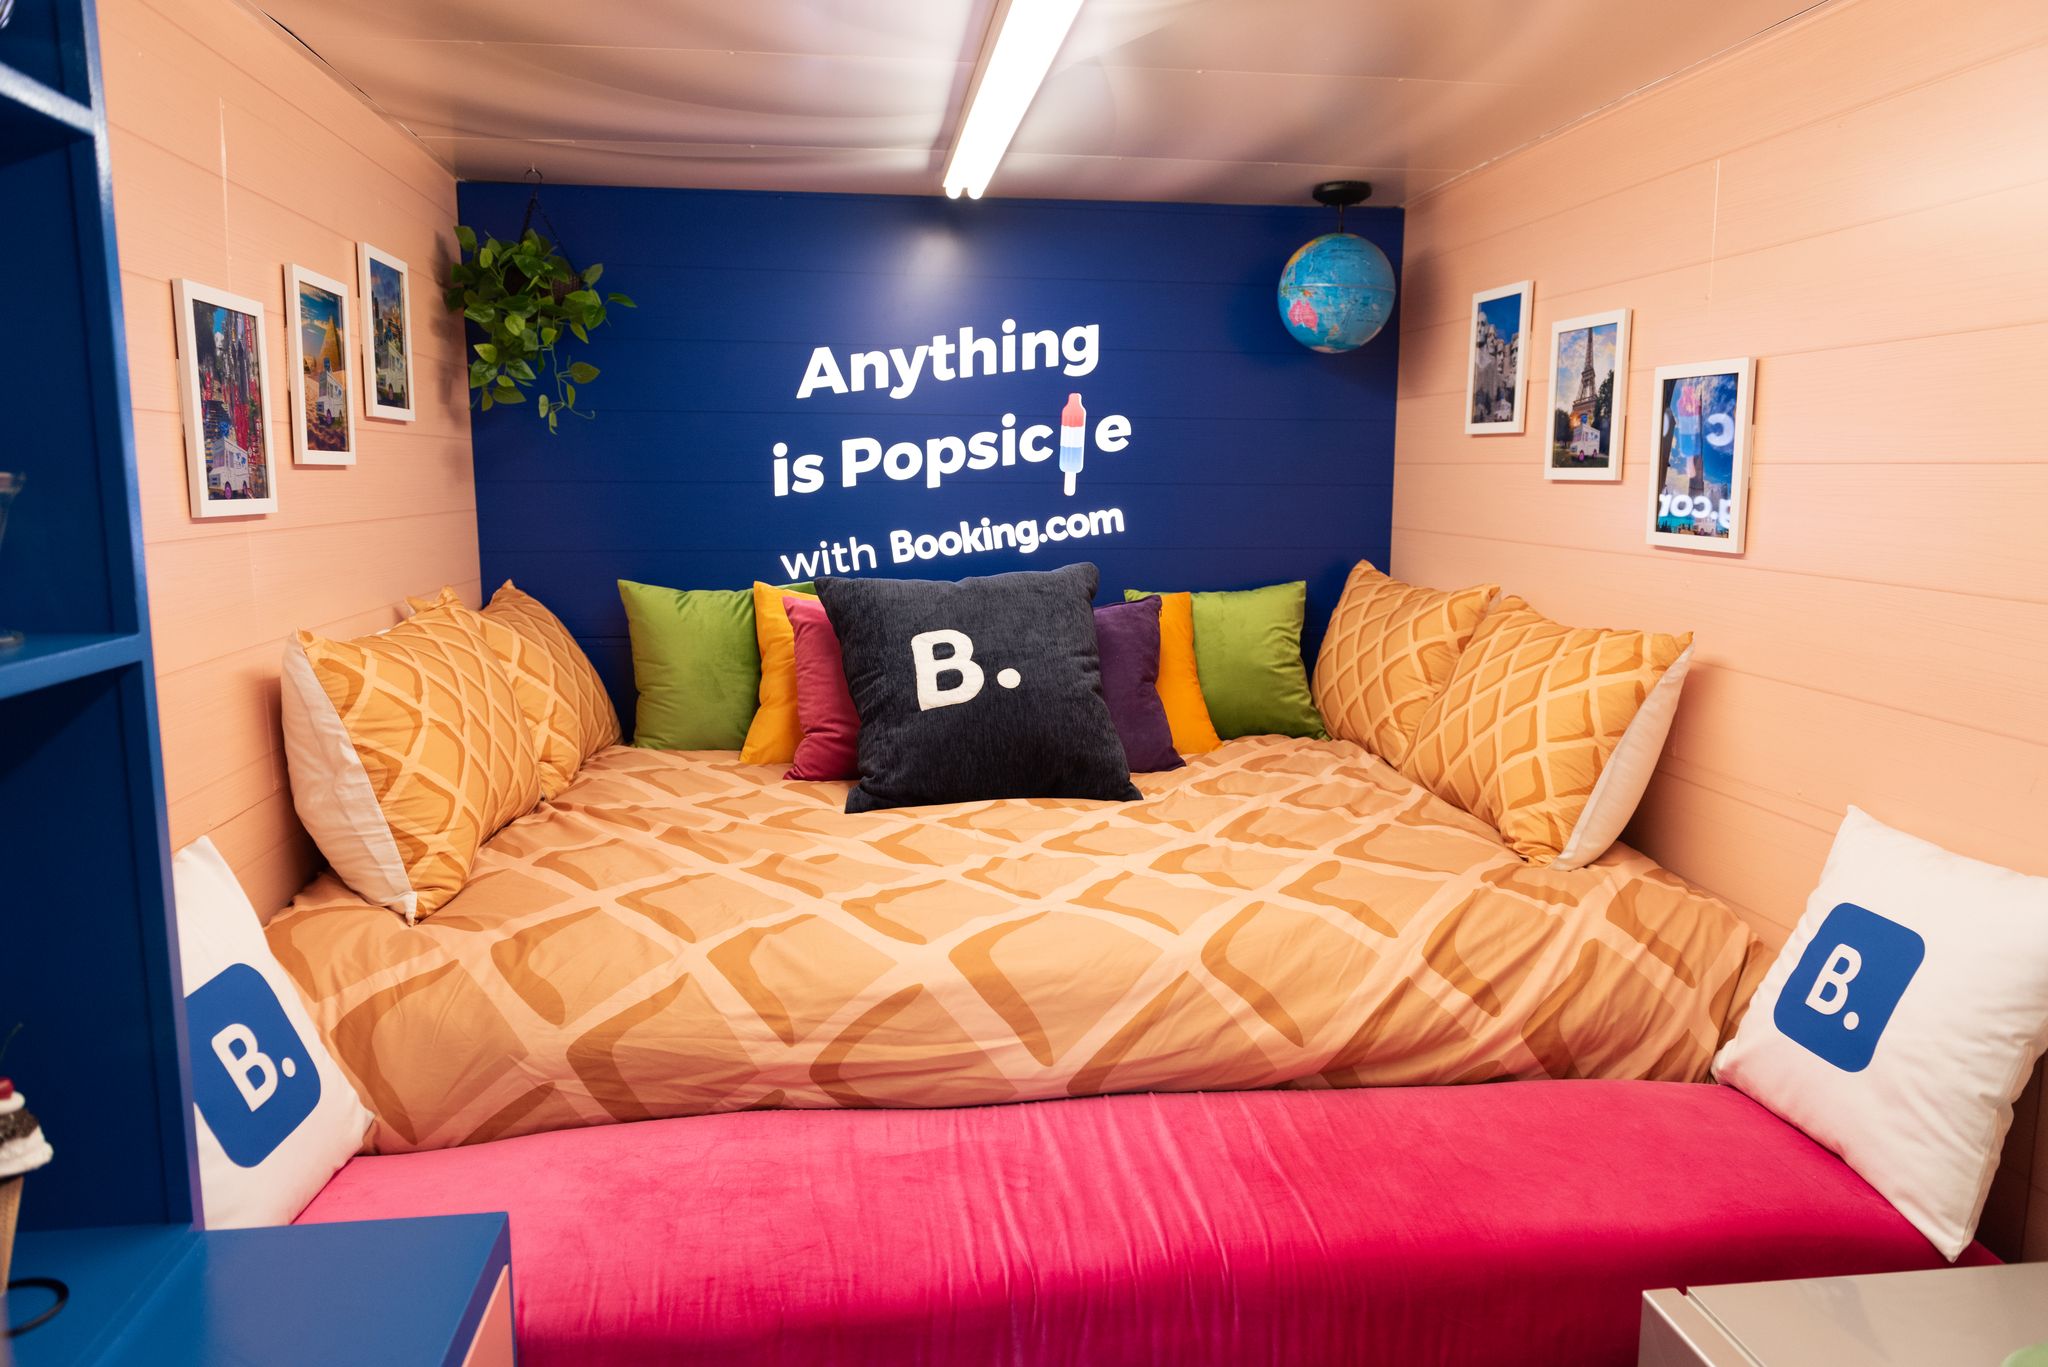 Booking.com mobile ice cream-themed hotel room